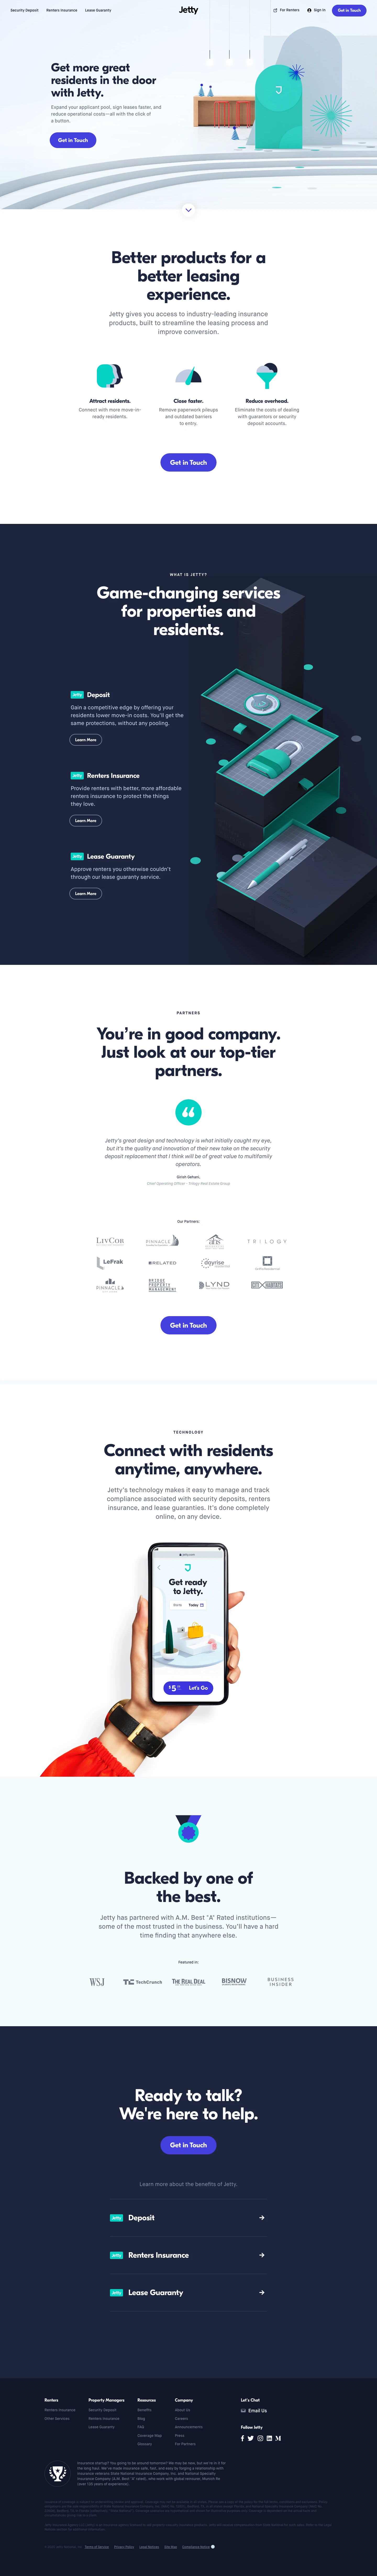 Jetty Landing Page Example: Get more great residents in the door with Jetty. Expand your applicant pool, sign leases faster, and reduce operational costs—all with the click of a button.